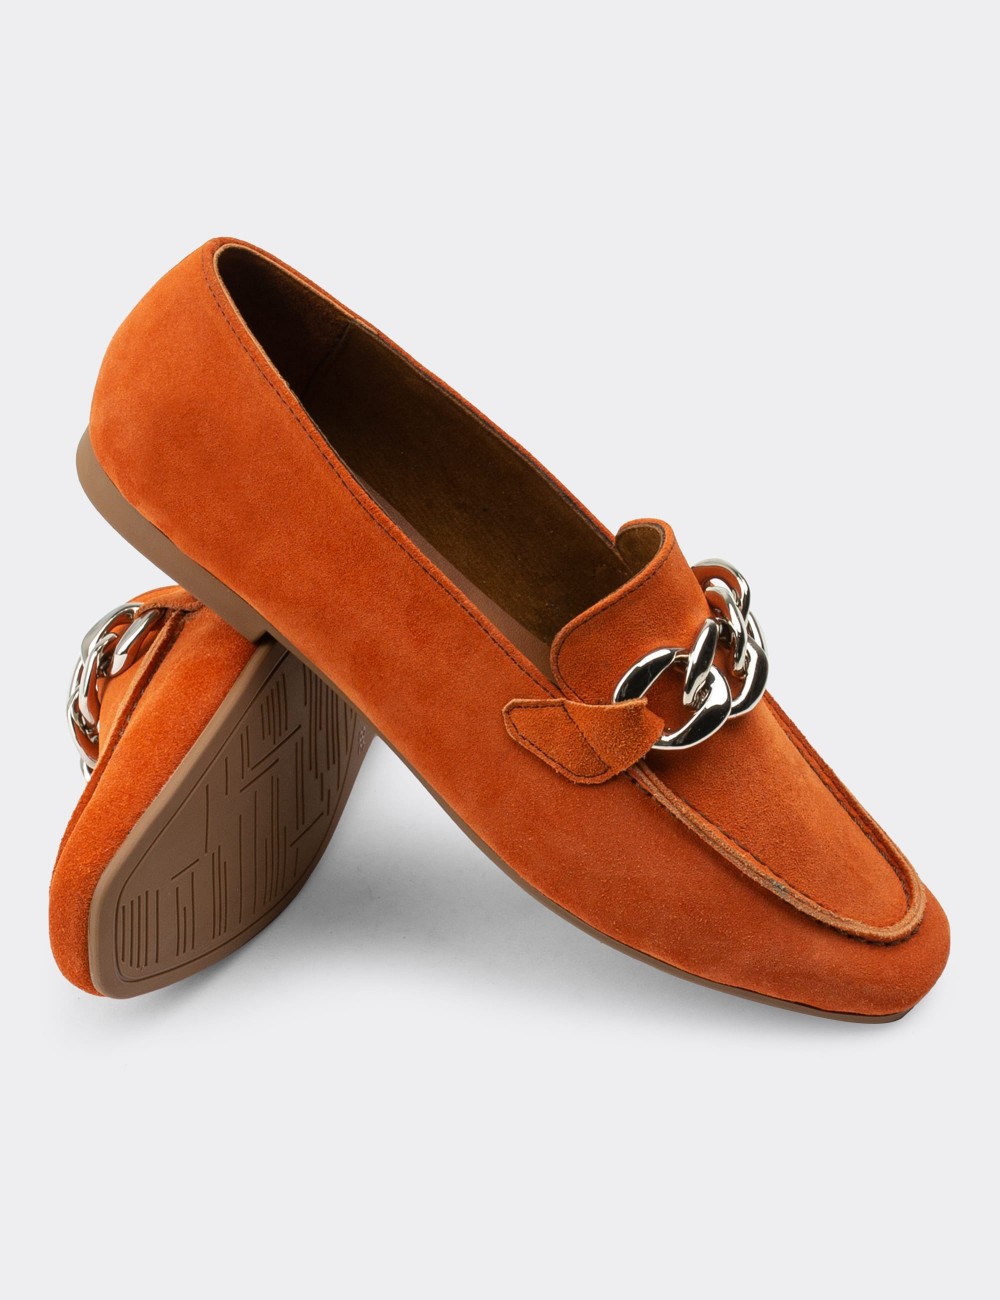 Orange Suede Leather Loafers - 01915ZTRCC01